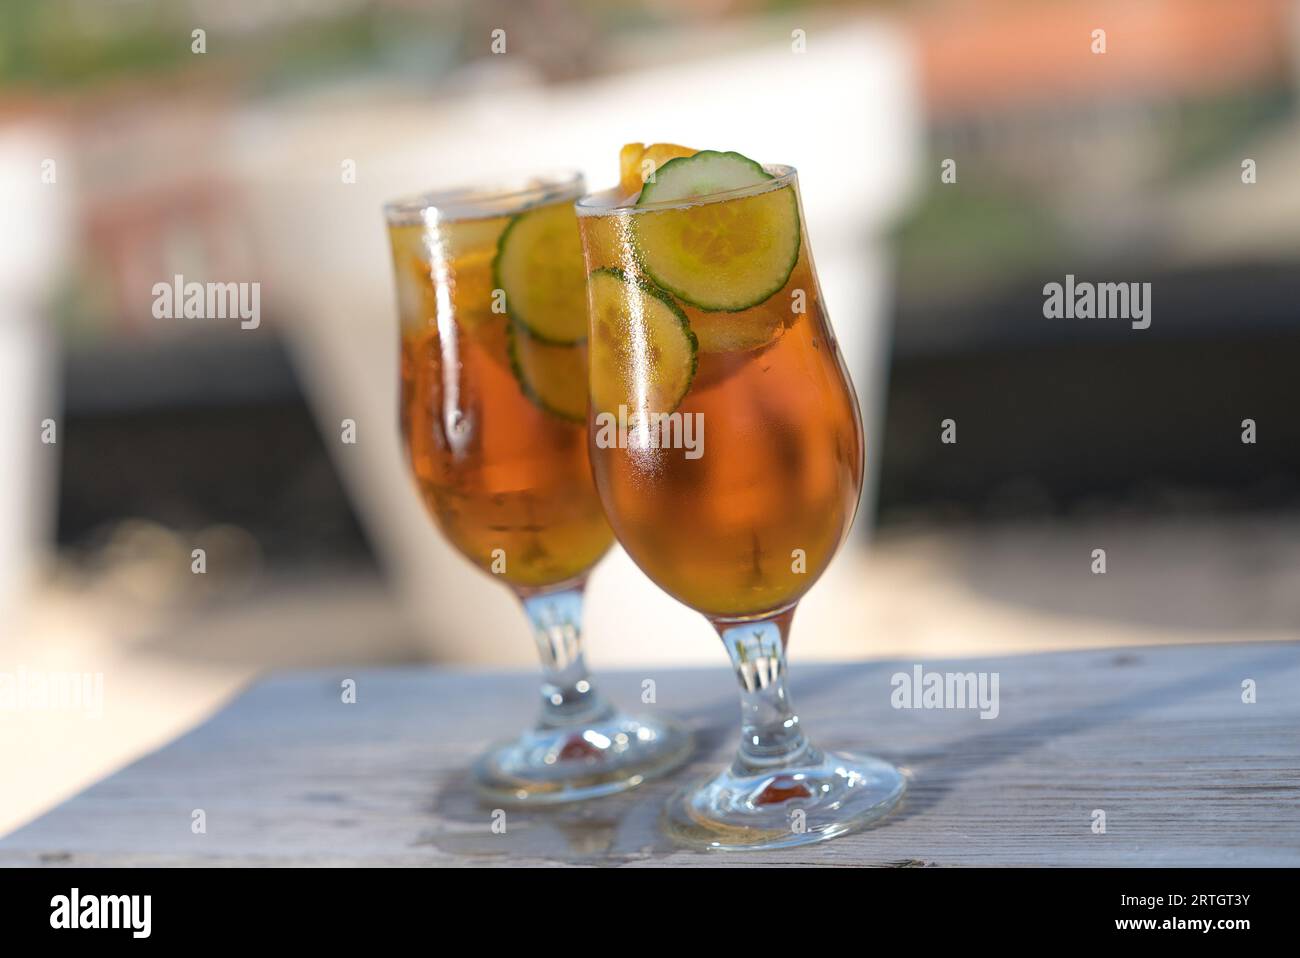 Refreshing summer cocktails for a sunny afternoon. Stock Photo